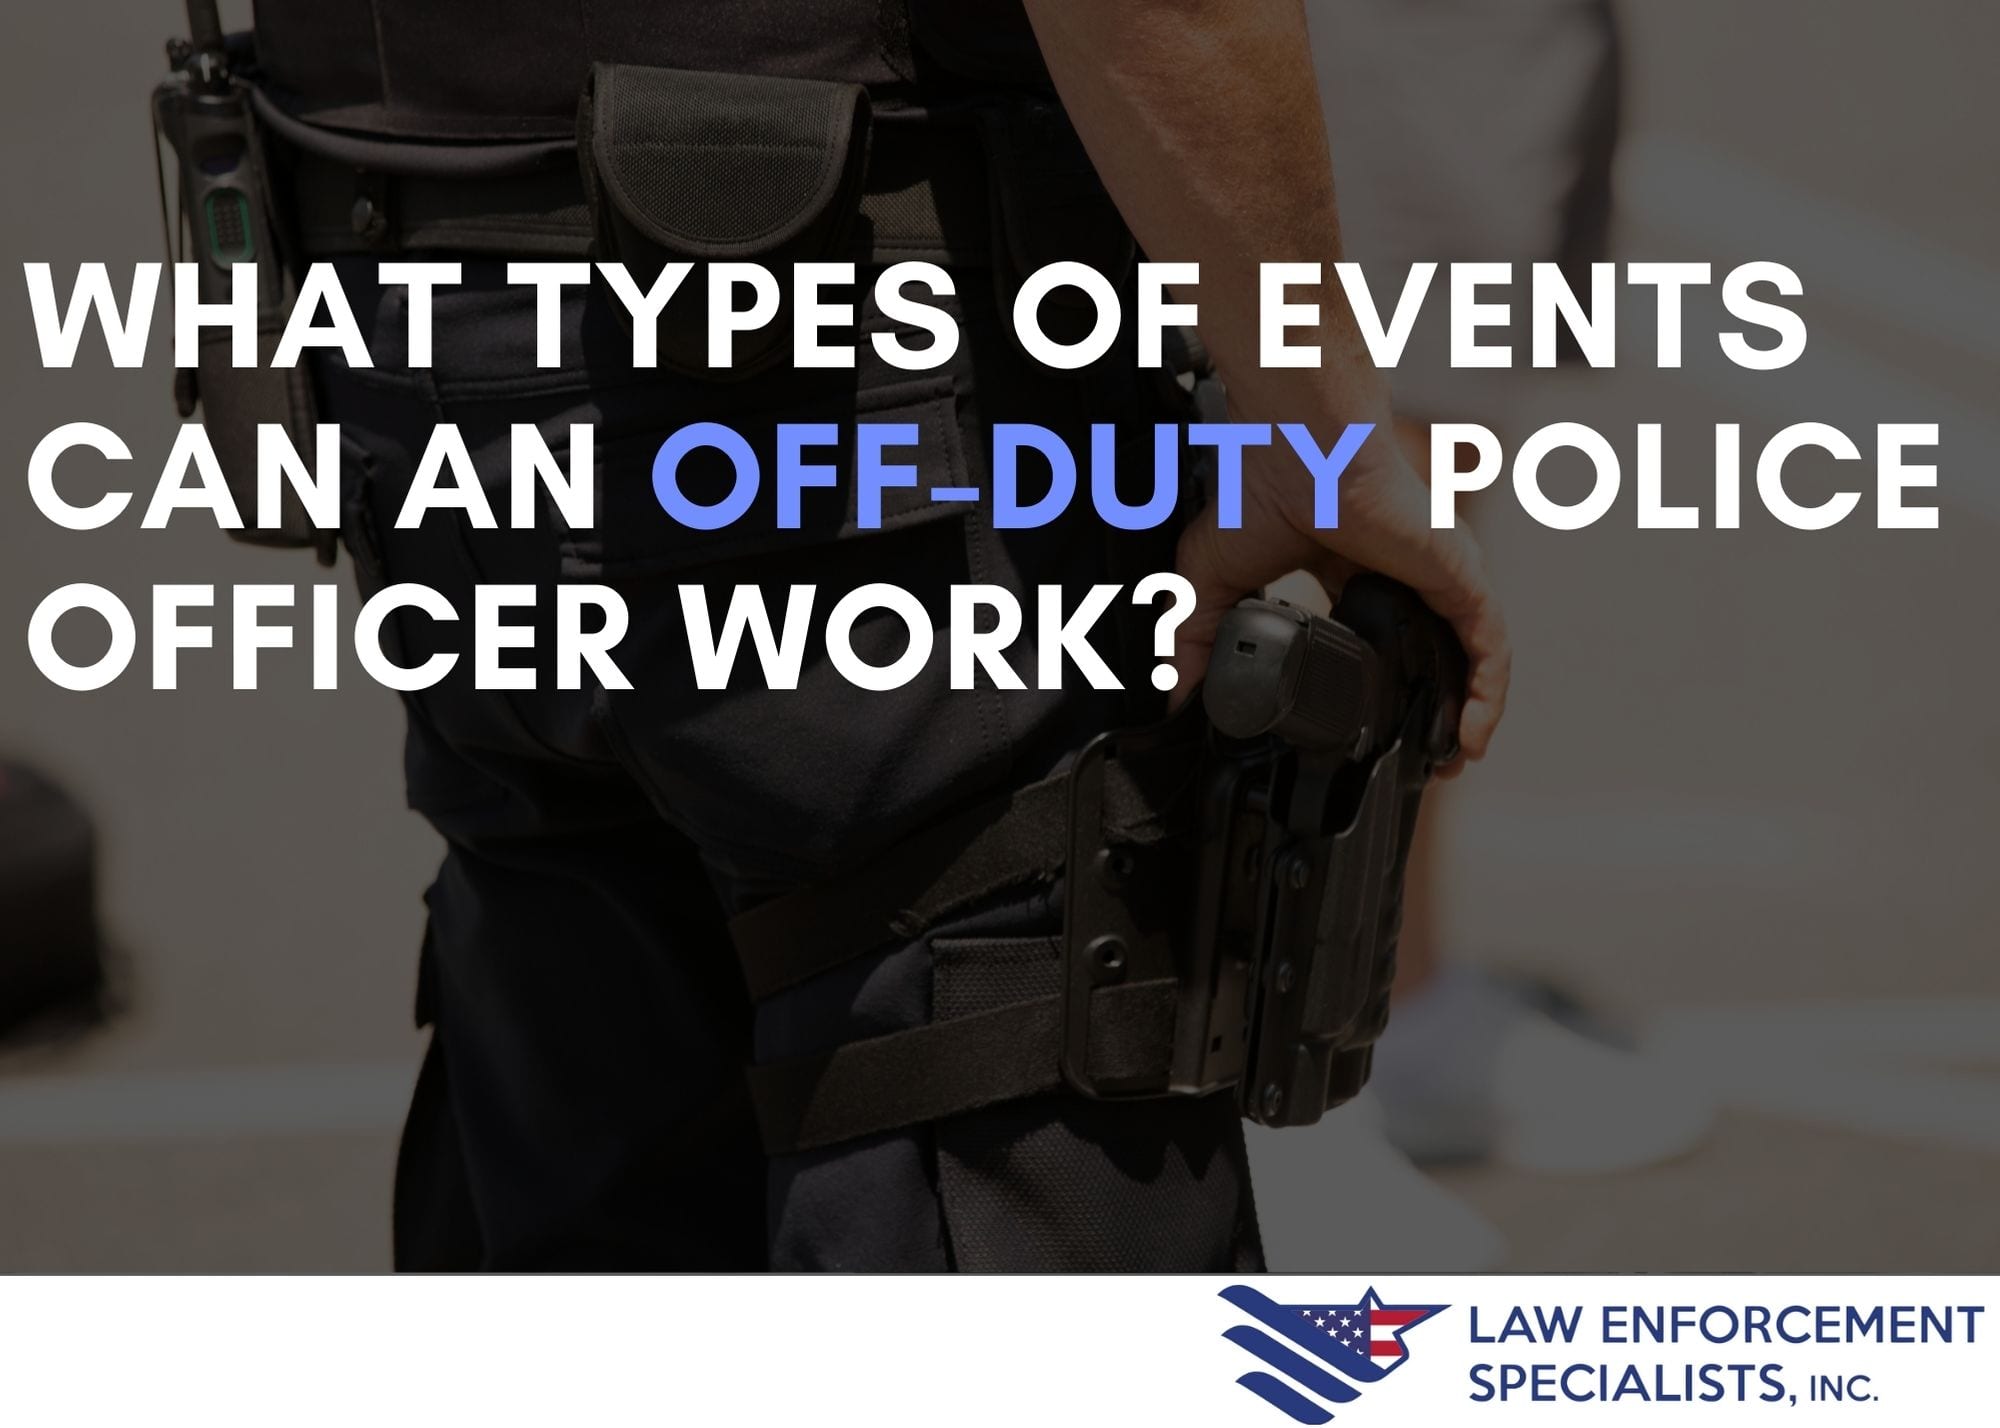 https://offdutypoliceofficers.com/wp-content/uploads/2021/02/what-types-of-events-can-an-off-duty-police-officer-work.jpg